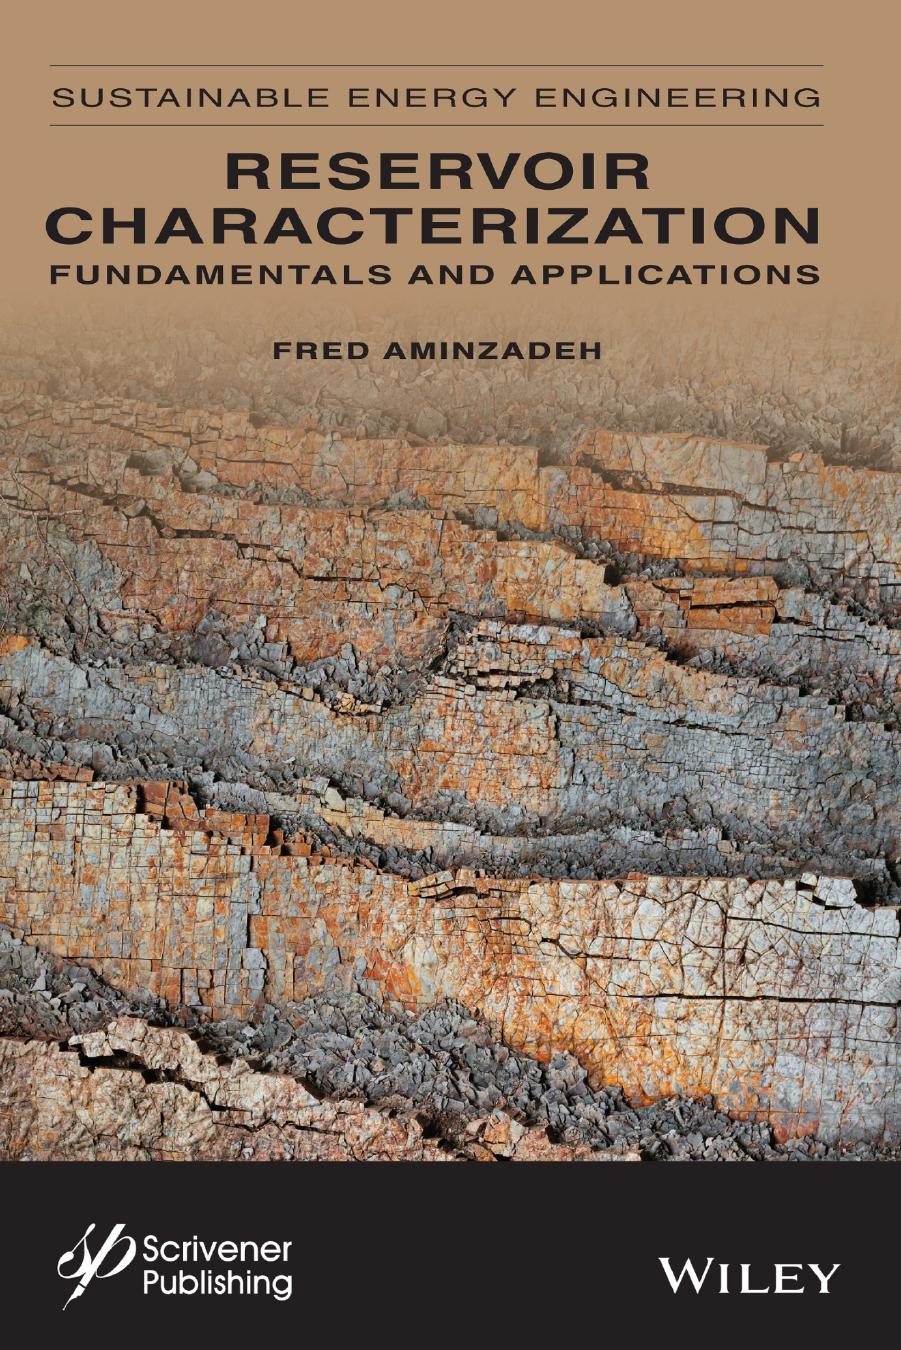 Reservoir Characterization. Fundamentals and Applications by Fred Aminzadeh